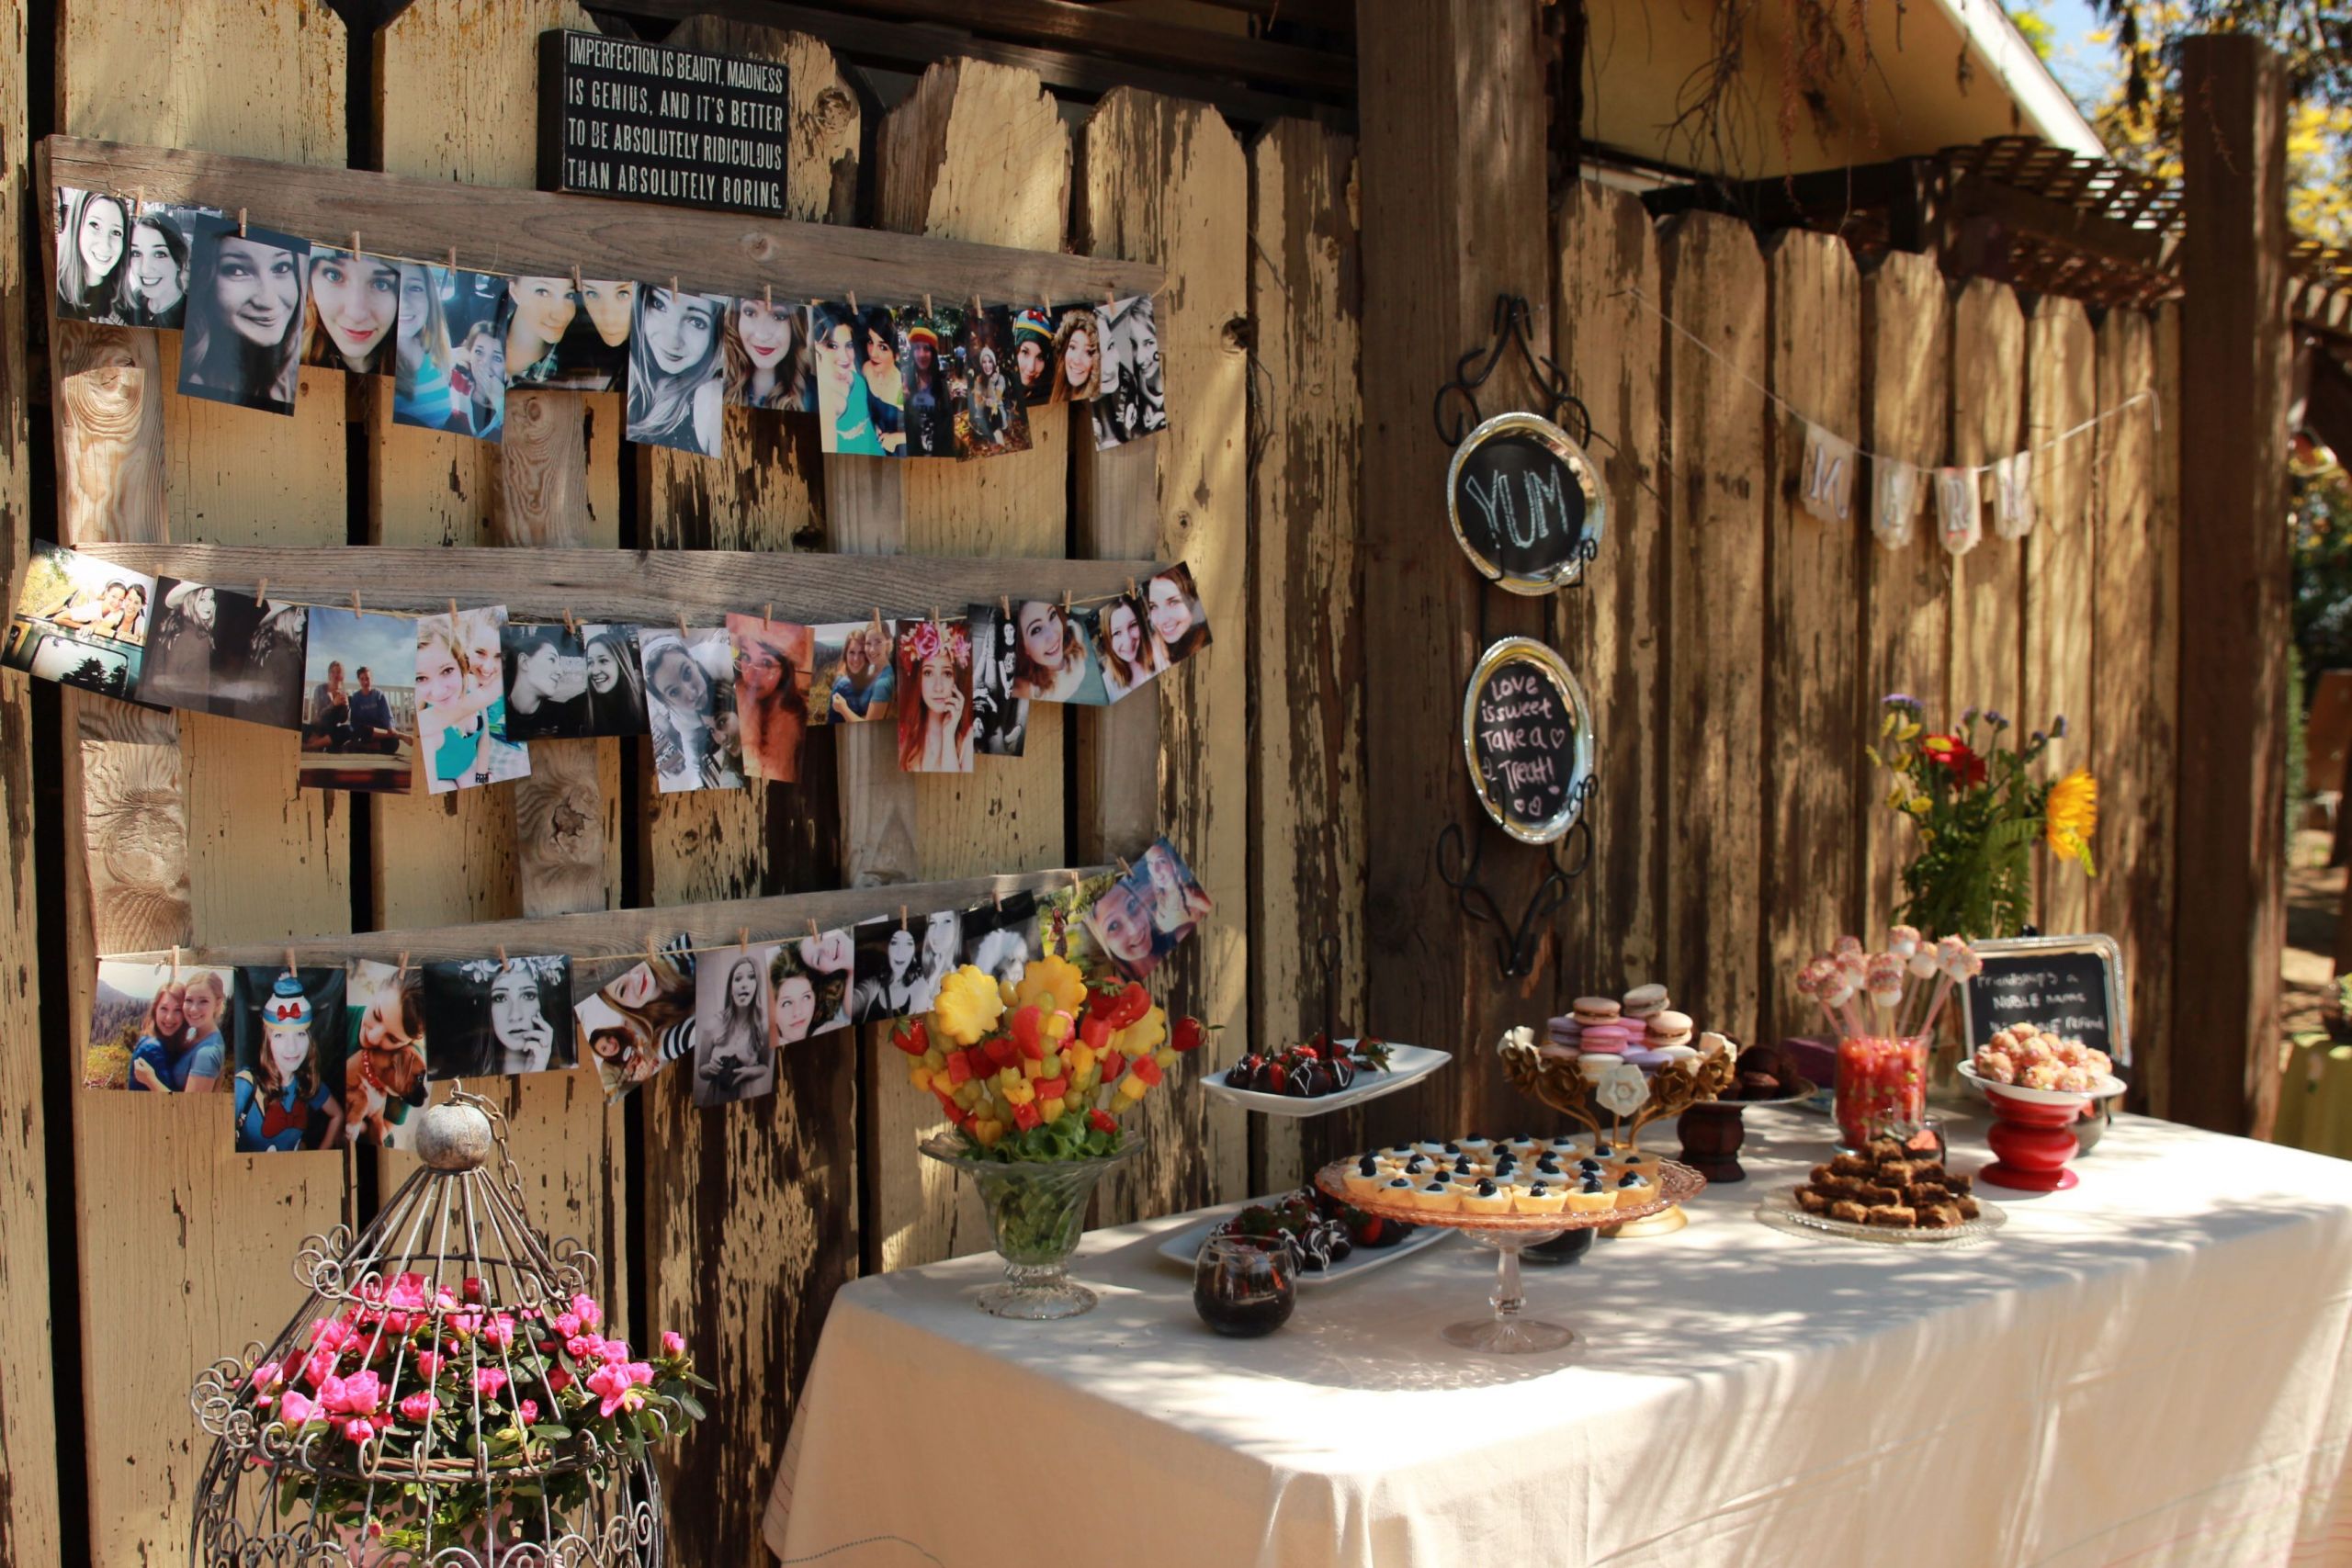 23 Of the Best Ideas for Backyard Sweet 16 Party Ideas ...